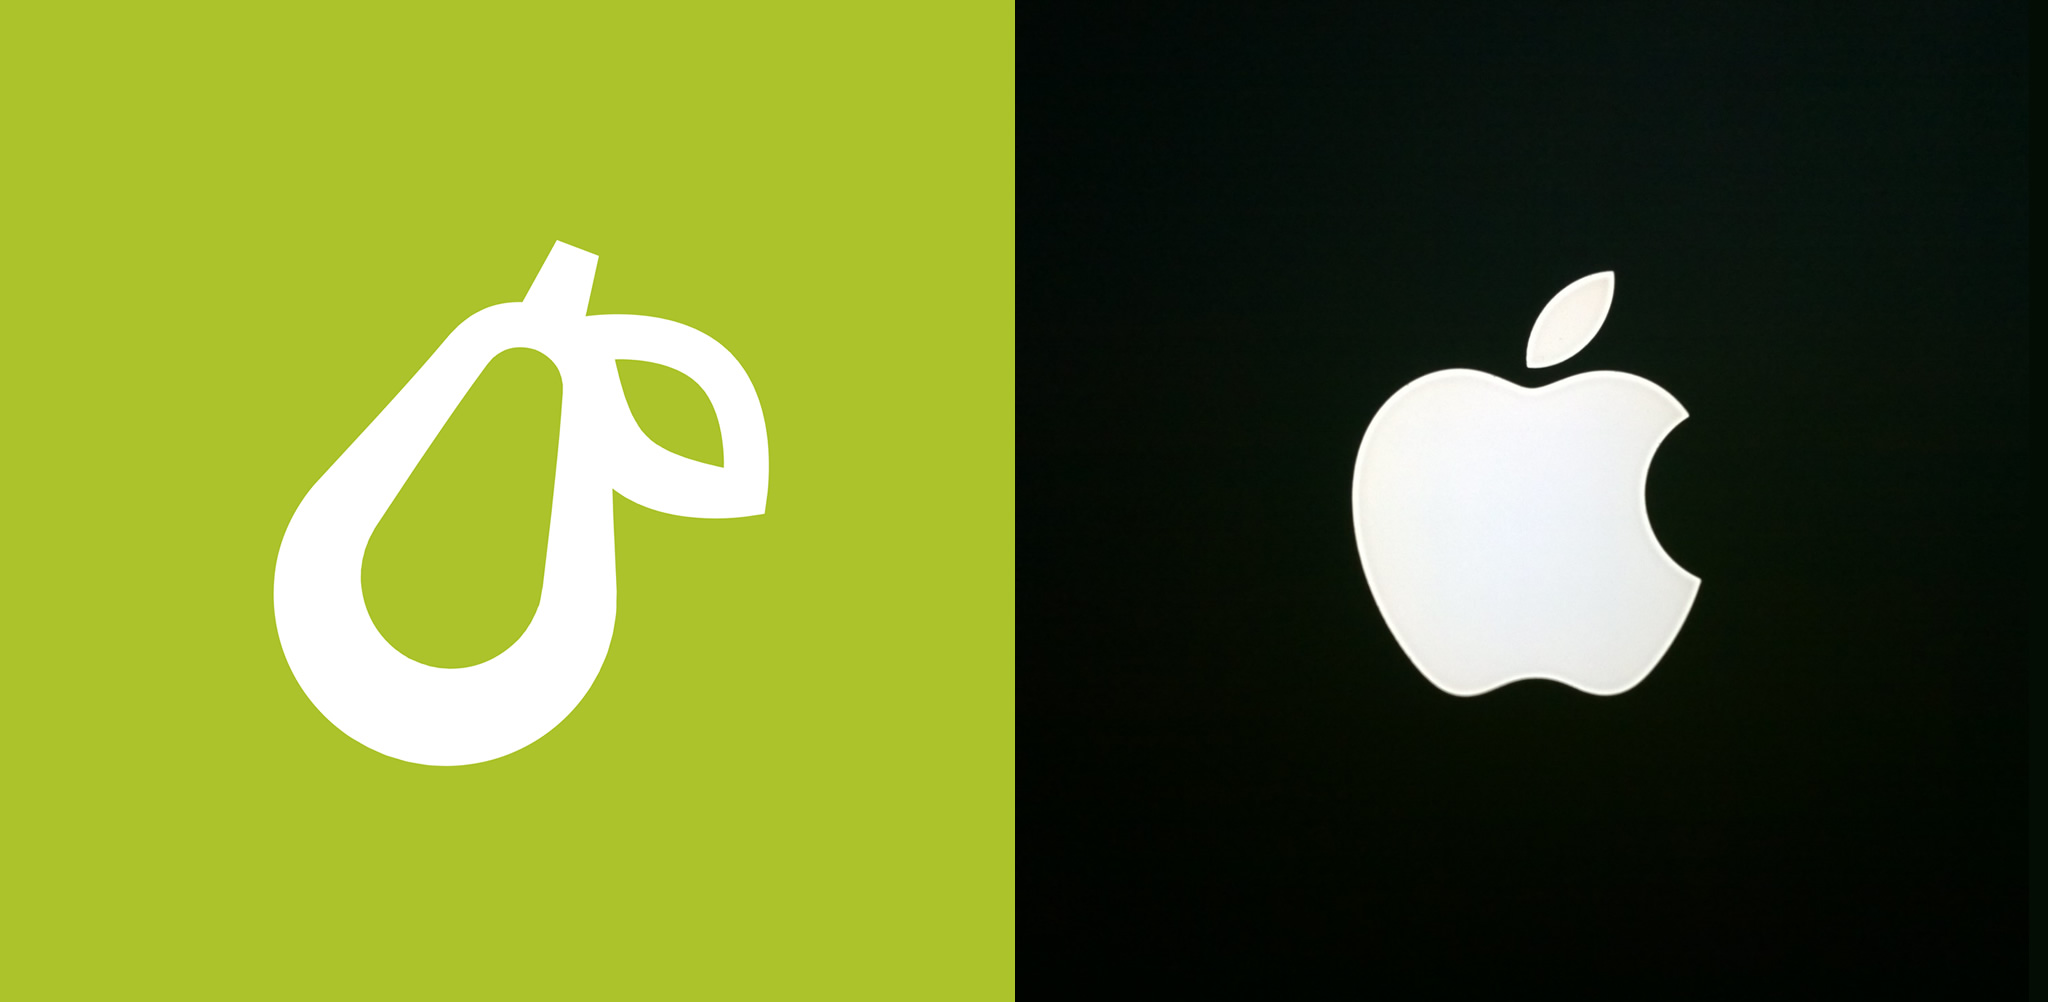 Logo lawsuit between Apple and Prepear could soon be resolved